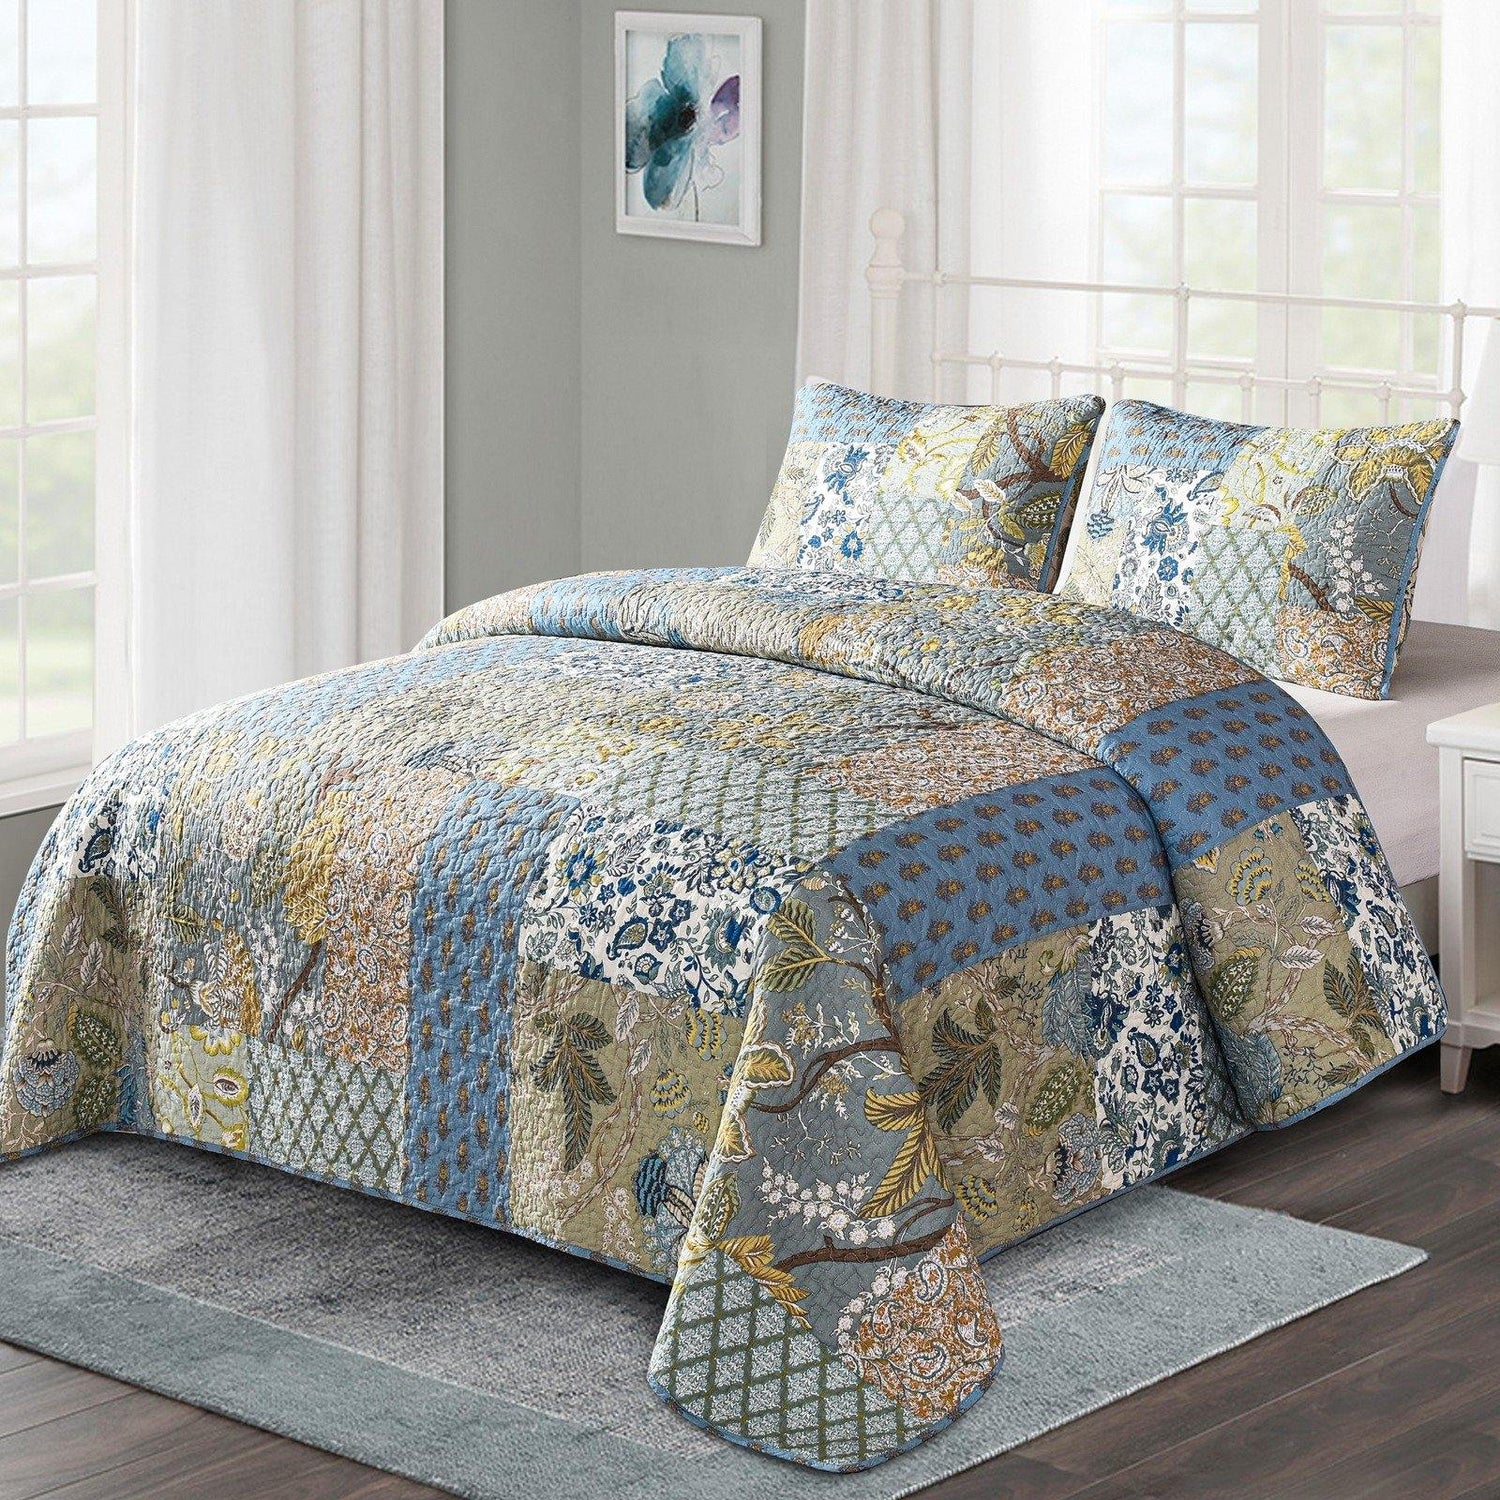 Bohemian floral stitching 3 Pieces Boho Quilt Set Coverlet with 2 Pillowcases - Wongs bedding